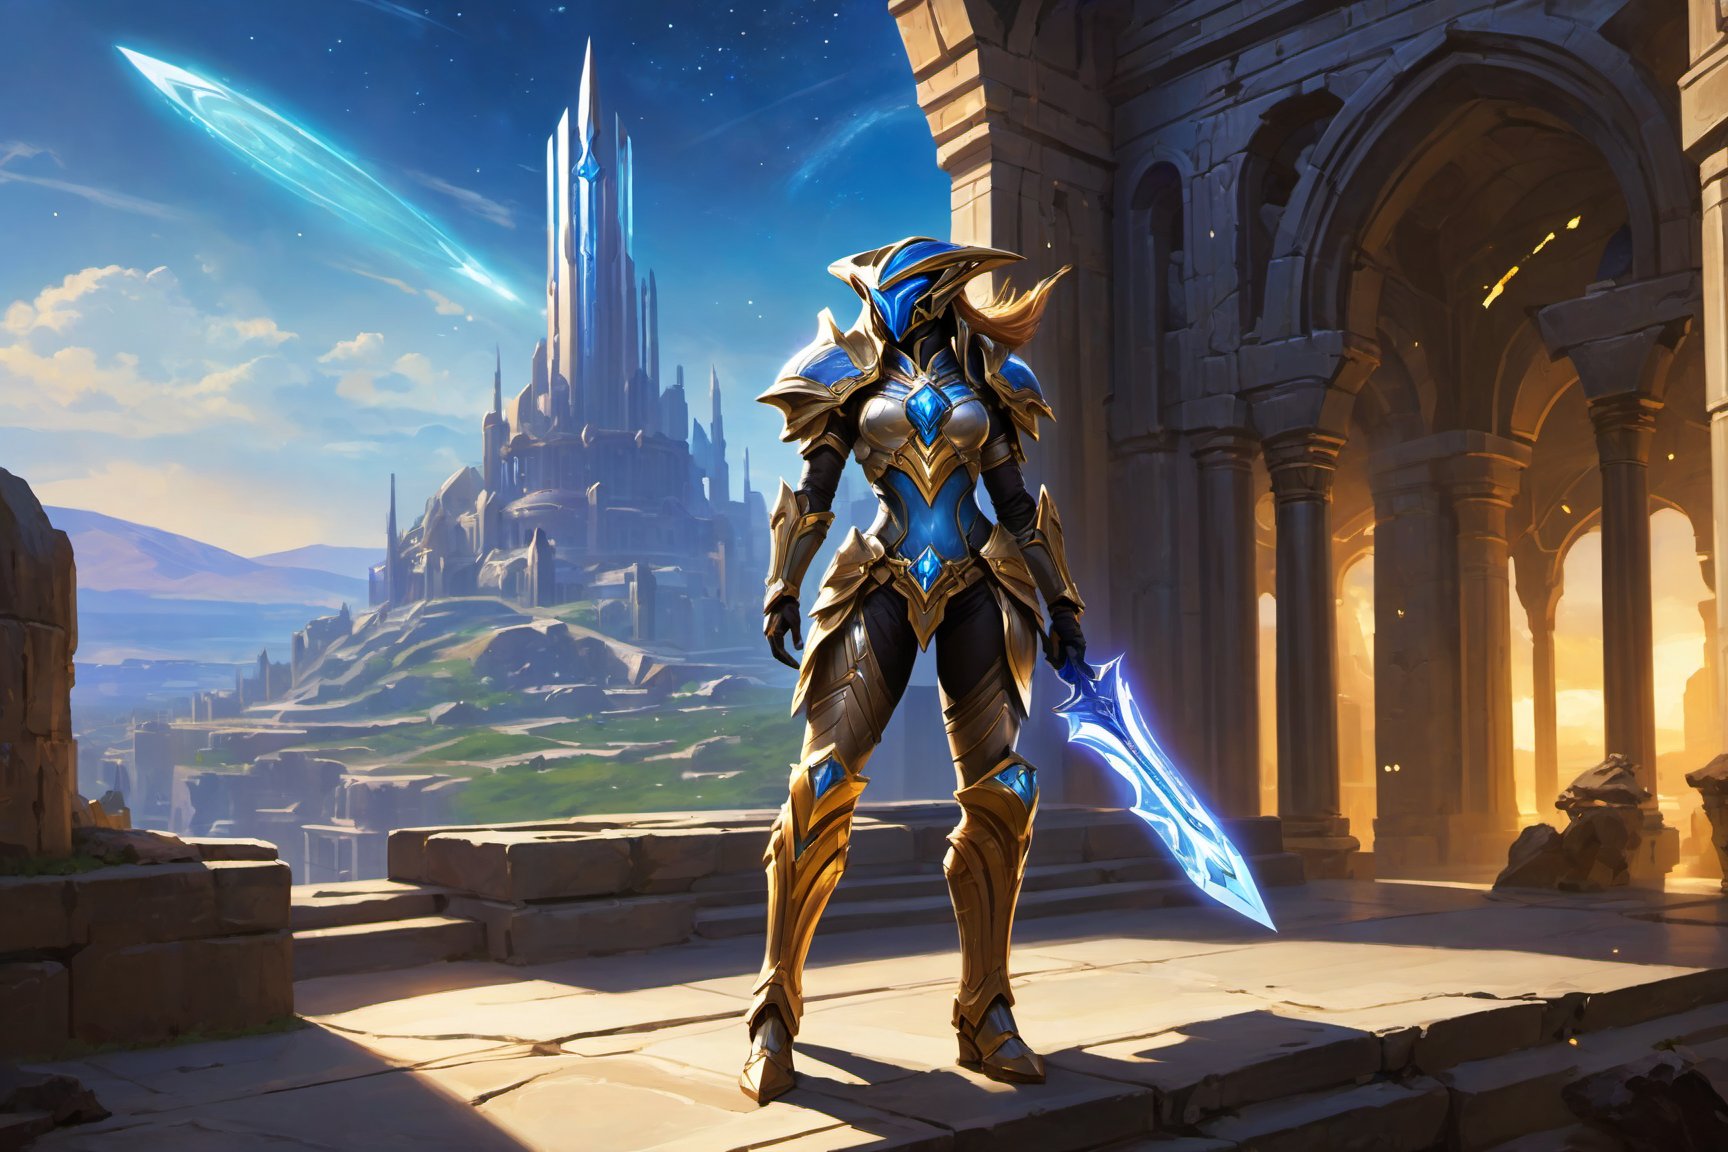 Aiur's Azure Horizon: A majestic female Protoss warrior, Zeratul's finest, stands victorious amidst the ruins of her homeworld. Golden light of dawn casts a warm glow on the cityscape, where crystalline spires and gleaming archways reflect the vibrant colors of the surrounding landscape. In the foreground, the warrior's armor glistens with an otherworldly sheen.

Camera shot 1: A wide-angle view captures the breathtaking vista, with the warrior centered in a dramatic pose, her staff crackling with energy as she surveys the devastation. The city's architecture blends seamlessly with the natural beauty of Aiur's rolling hills and azure skies.

Camera shot 2: A medium shot zooms in on the warrior, showcasing her determined expression and athletic physique, clad in a suit of gleaming silver armor adorned with intricate, swirling patterns that seem to shift and shimmer like the stars. The cityscape recedes into the background, emphasizing the warrior's imposing figure.

Depth of field: The foreground, featuring the warrior and the ruins, remains in sharp focus, while the distant landscape softly blurs, creating a sense of depth and dimensionality.

In this 2D masterpiece, every element – from the radiant colors to the intricate details – comes together to create an awe-inspiring, high-quality image that embodies the essence of Protoss ingenuity and resilience.